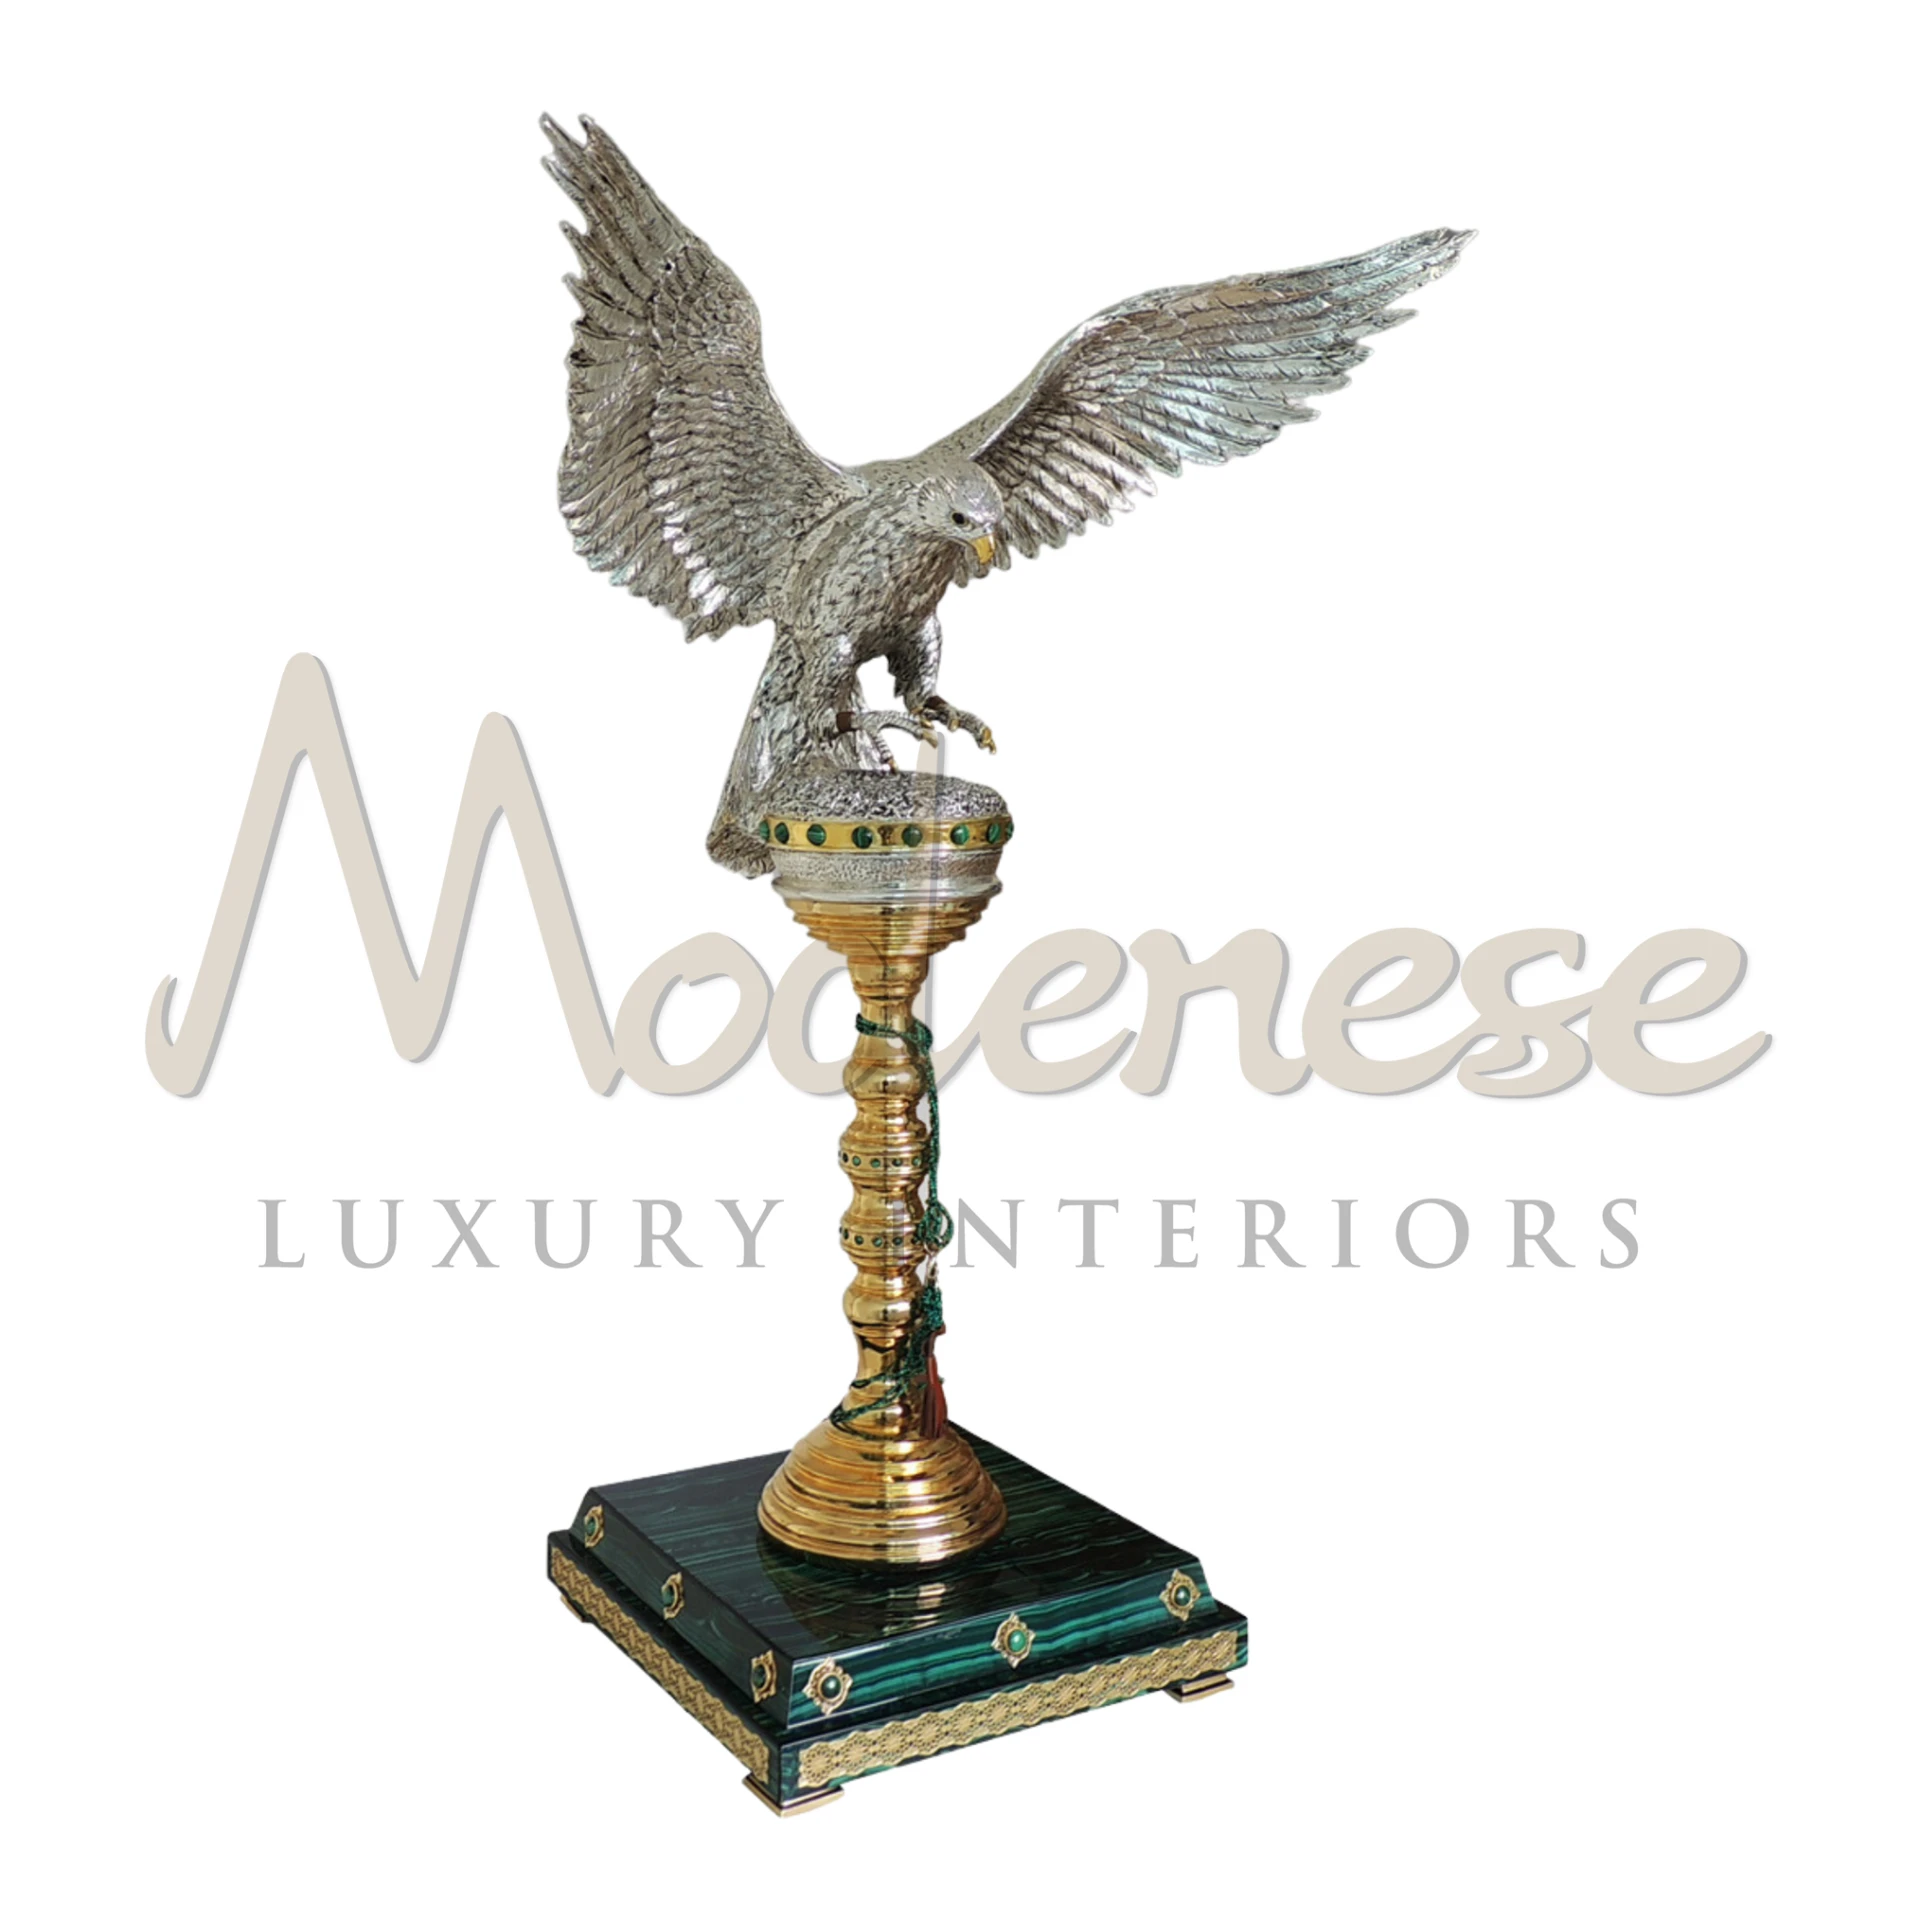 Royal Pedestal Falcon on an intricately designed stand, enhancing home décor with a regal and majestic appearance, ideal for luxurious and classic settings.